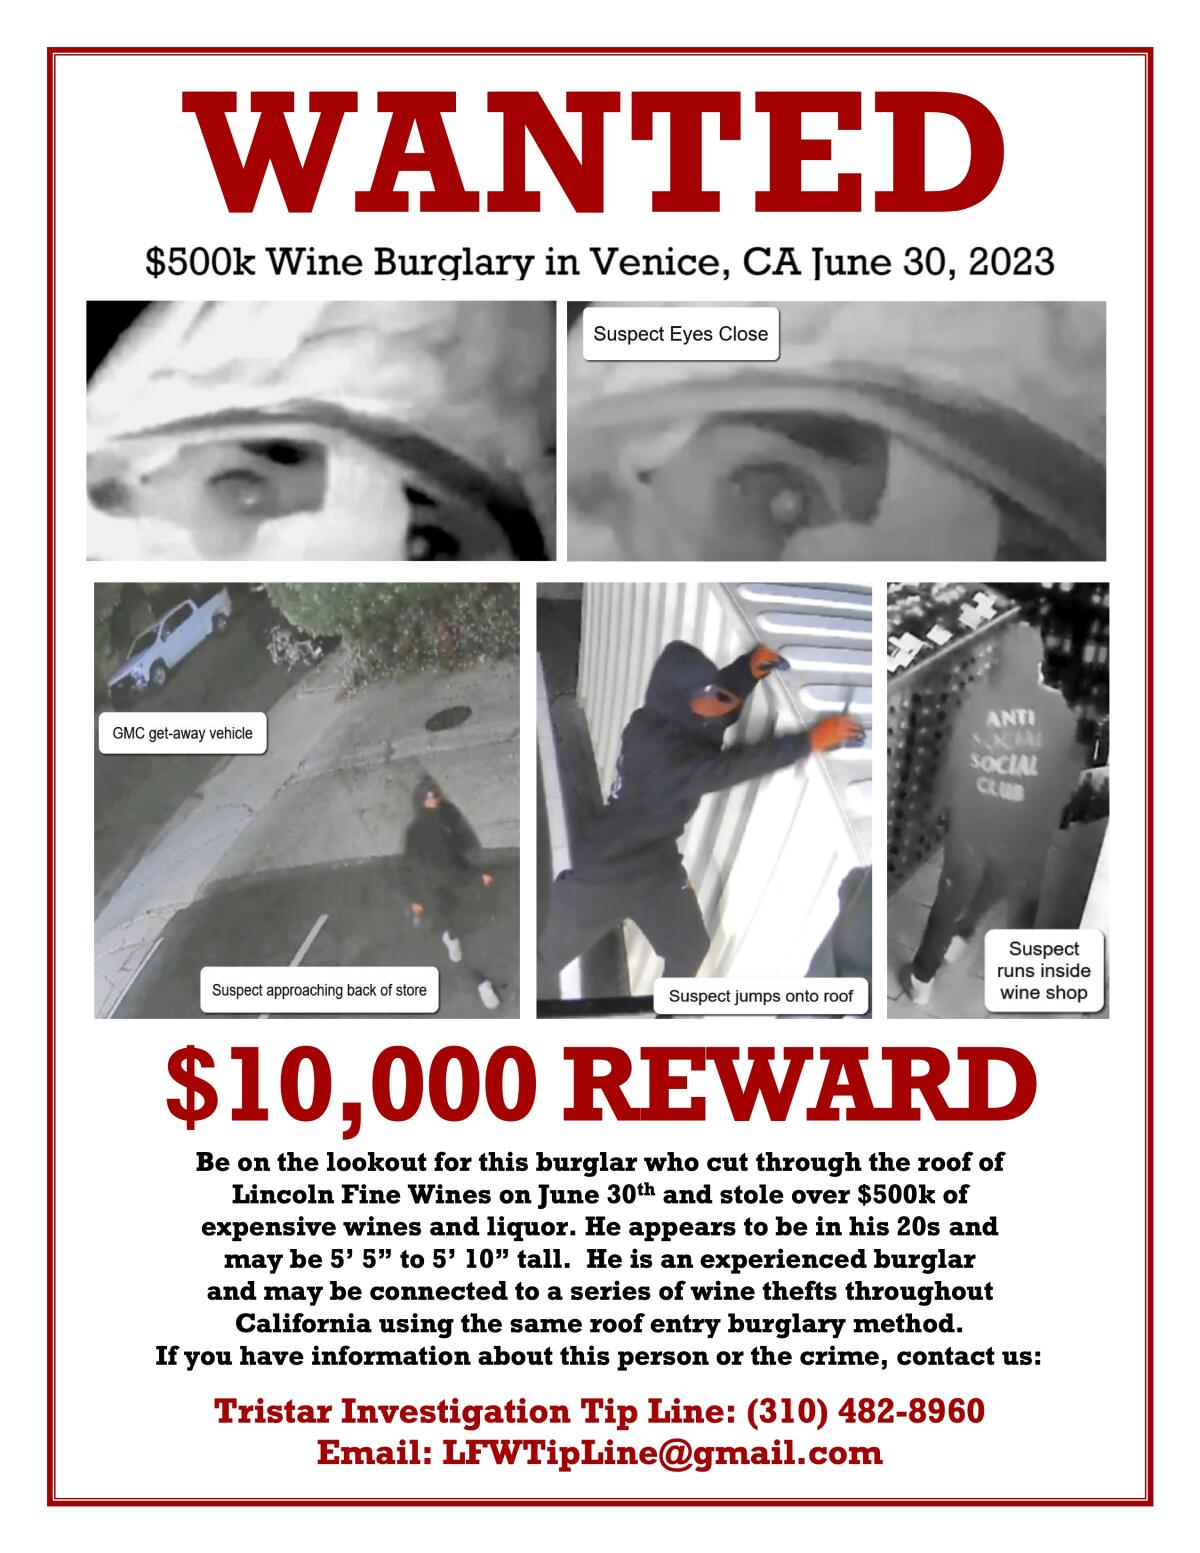 A "wanted" poster shows images of the man seen in surveillance camera footage breaking into Lincoln Fine Wines